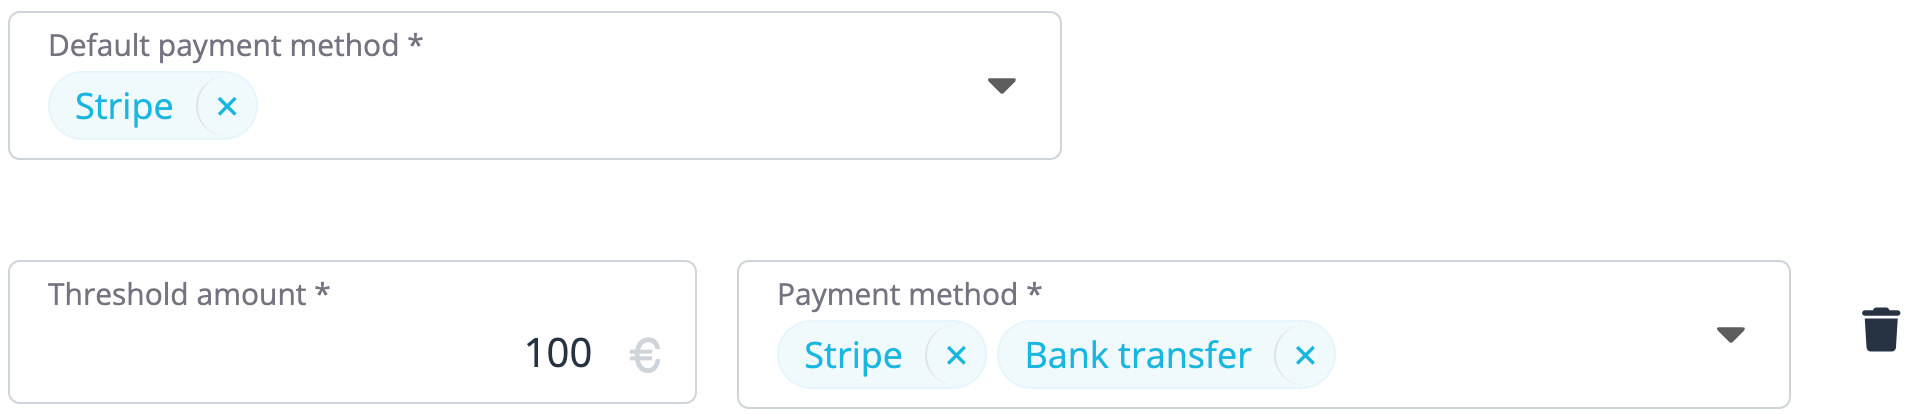 Threshold selecting default payment method + 2 payment methods.png